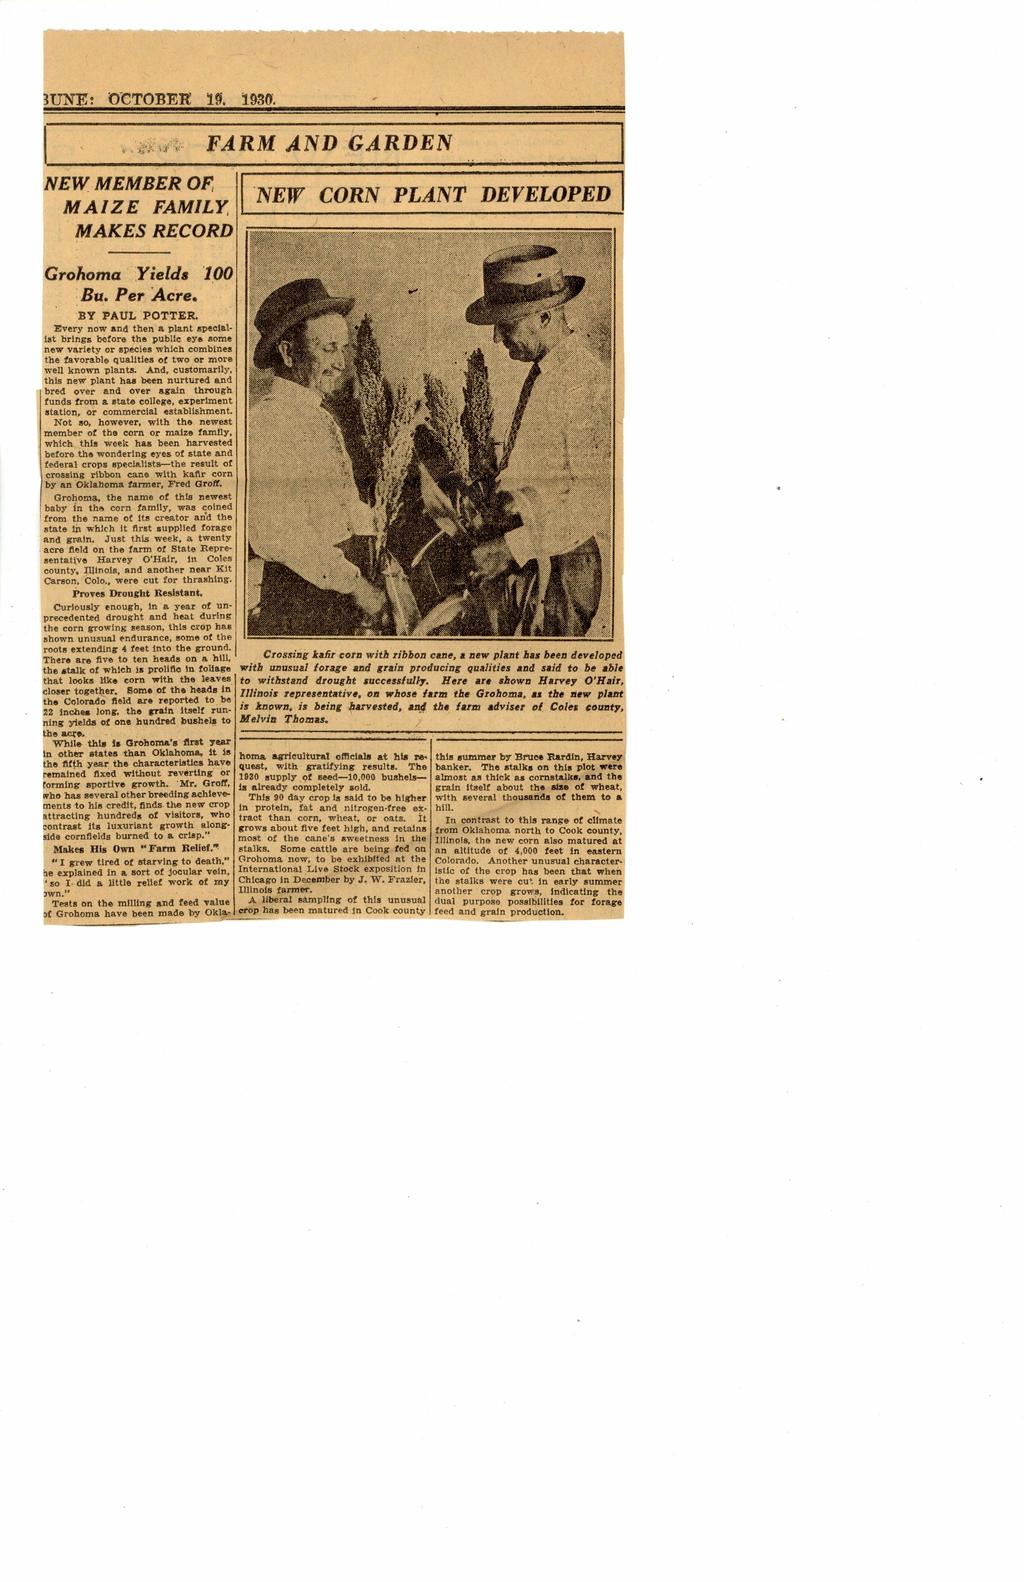 ' 3TJNE: OCTOBER 10. 1930. FARM AND GARDEN NEW MEMBER OF MAIZE FAMILY, MAKES RECORD NEW CORN PLANT DEVELOPED Grohoma Yields 100 Bu. Per Acre. BY PAUL POTTER.